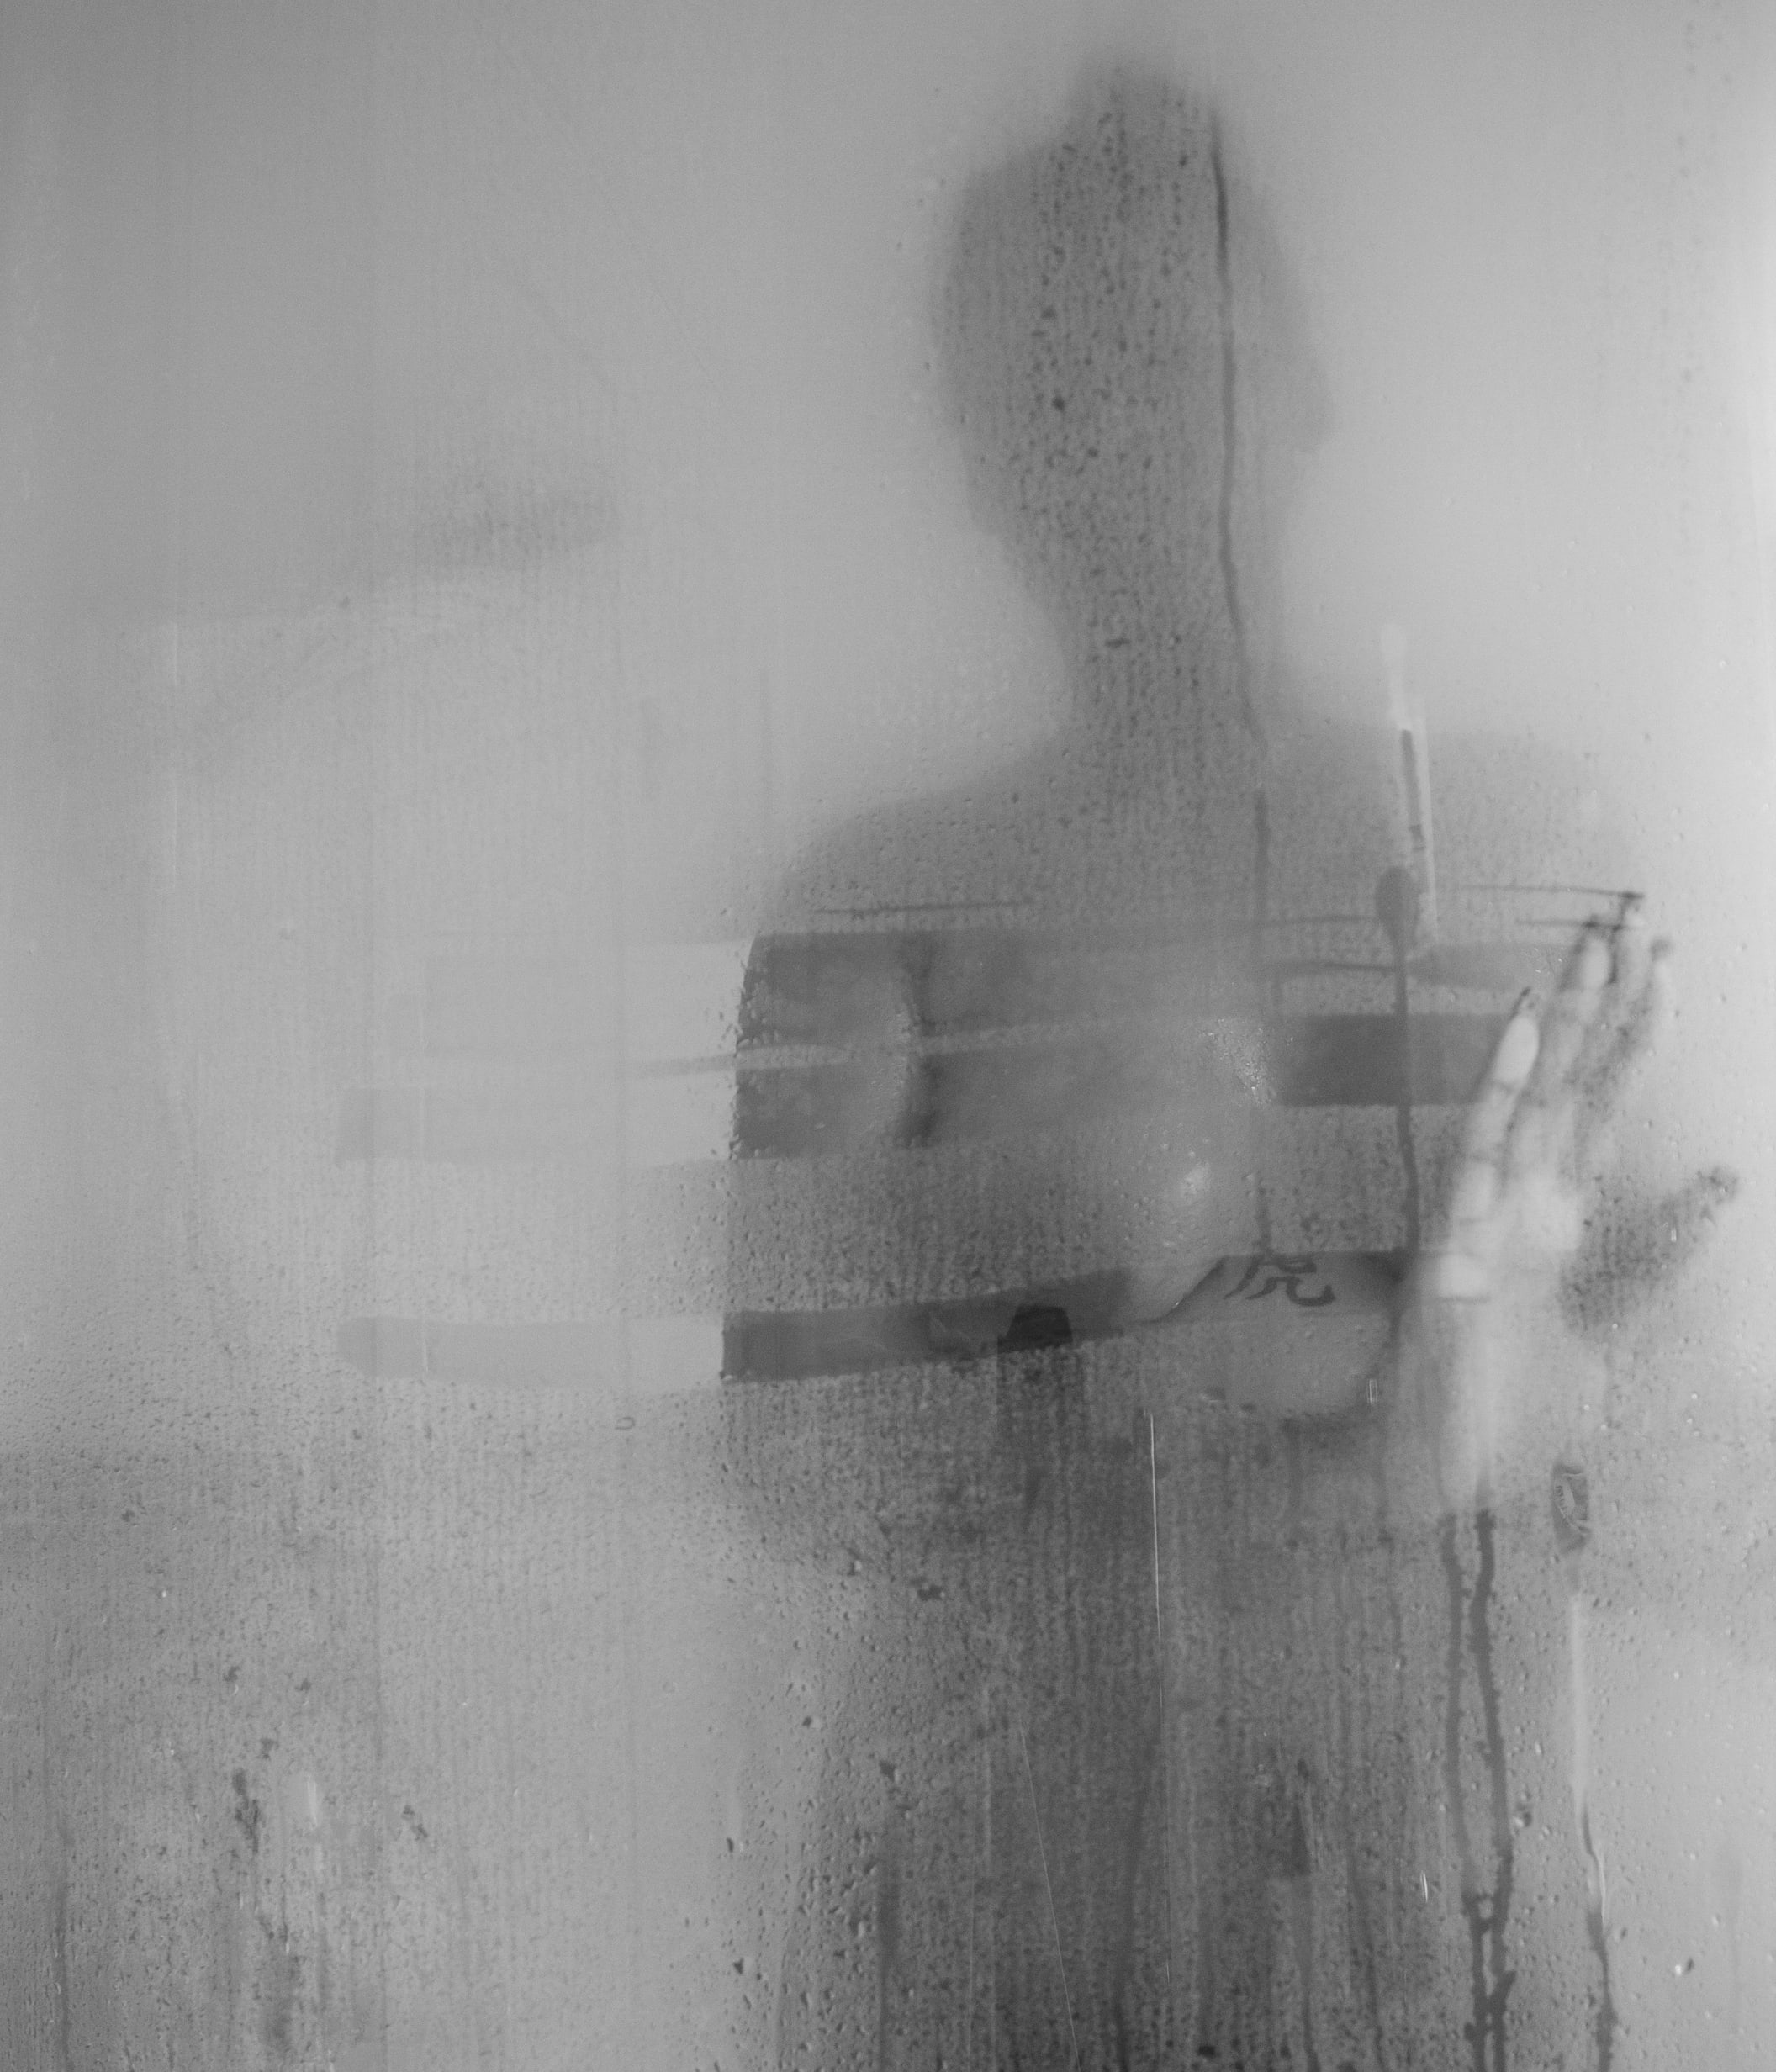 Naked woman in shower slightly visible through steam